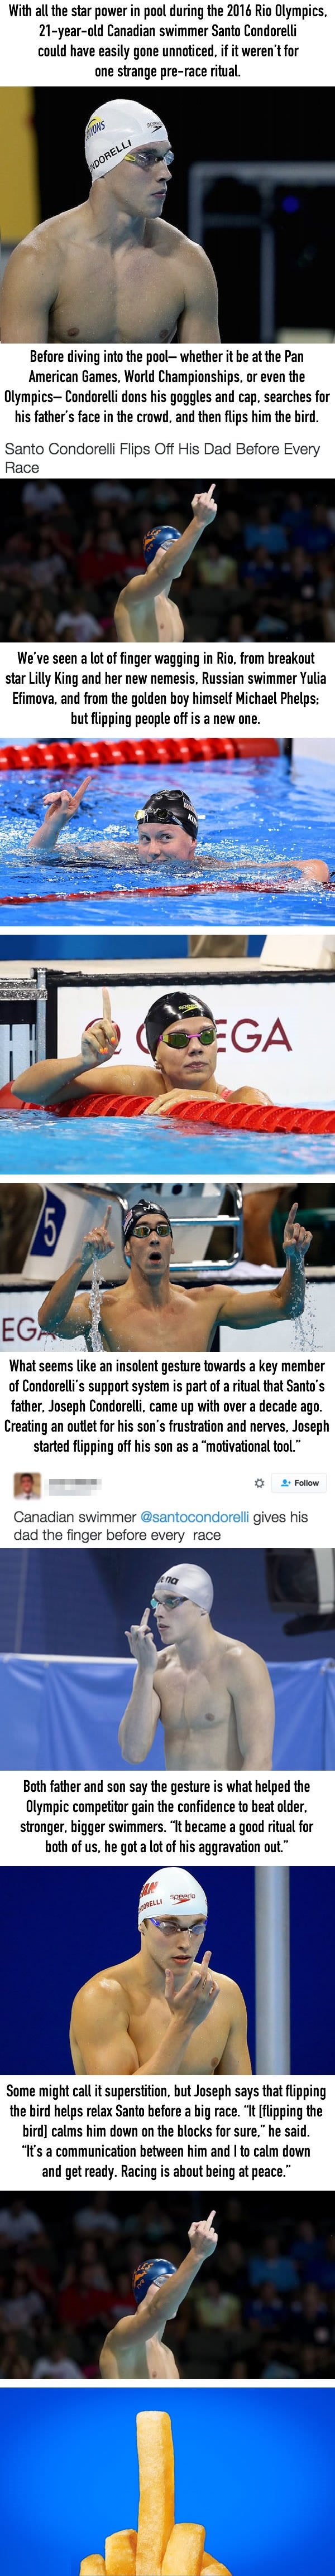 Why Canadian swimmer Santo Condorelli wouldn't stop flipping the bird